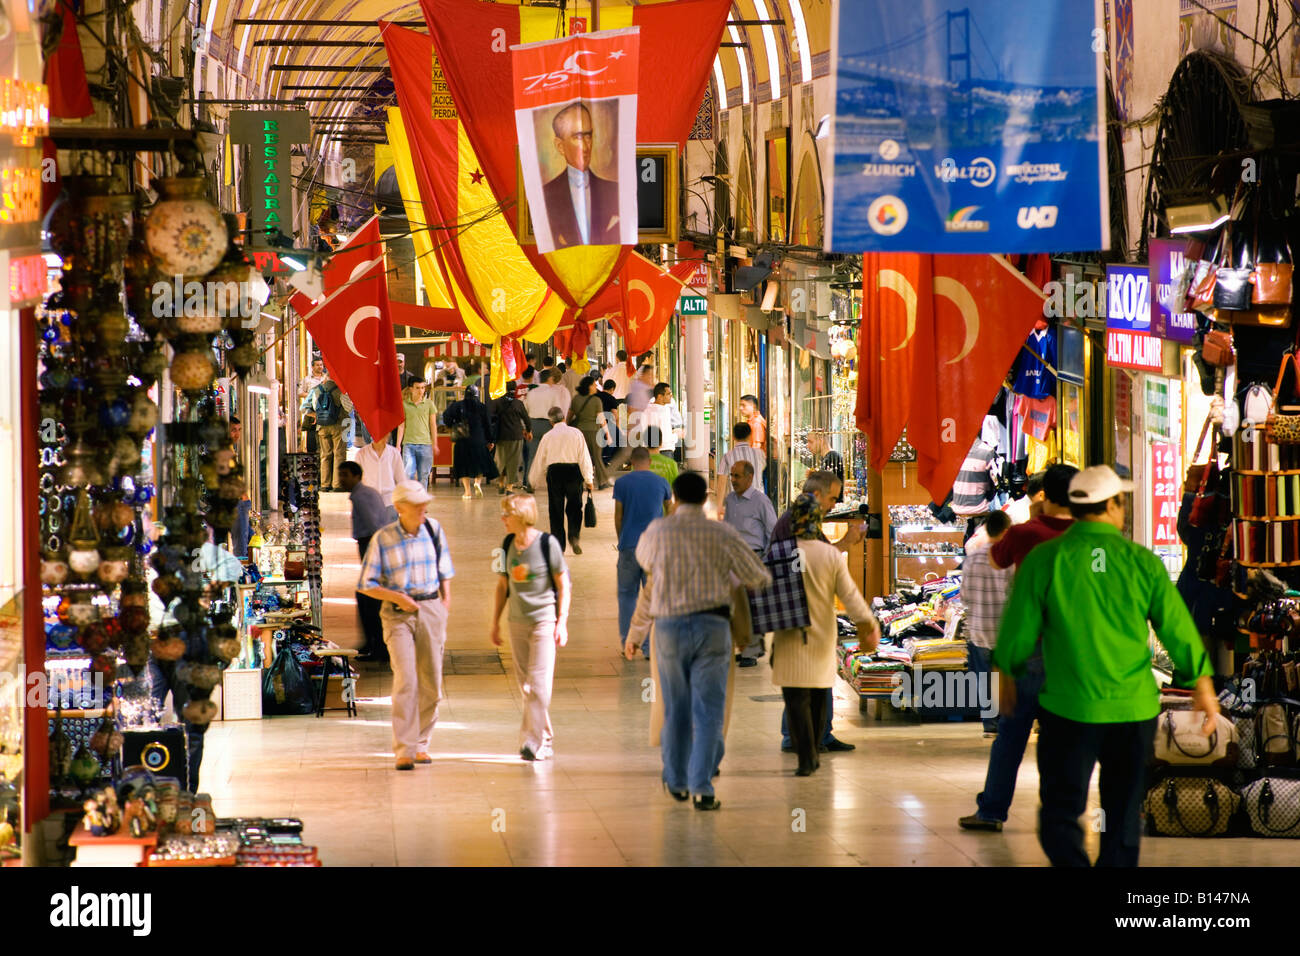 The grand bazar in Istanbul Stock Photo